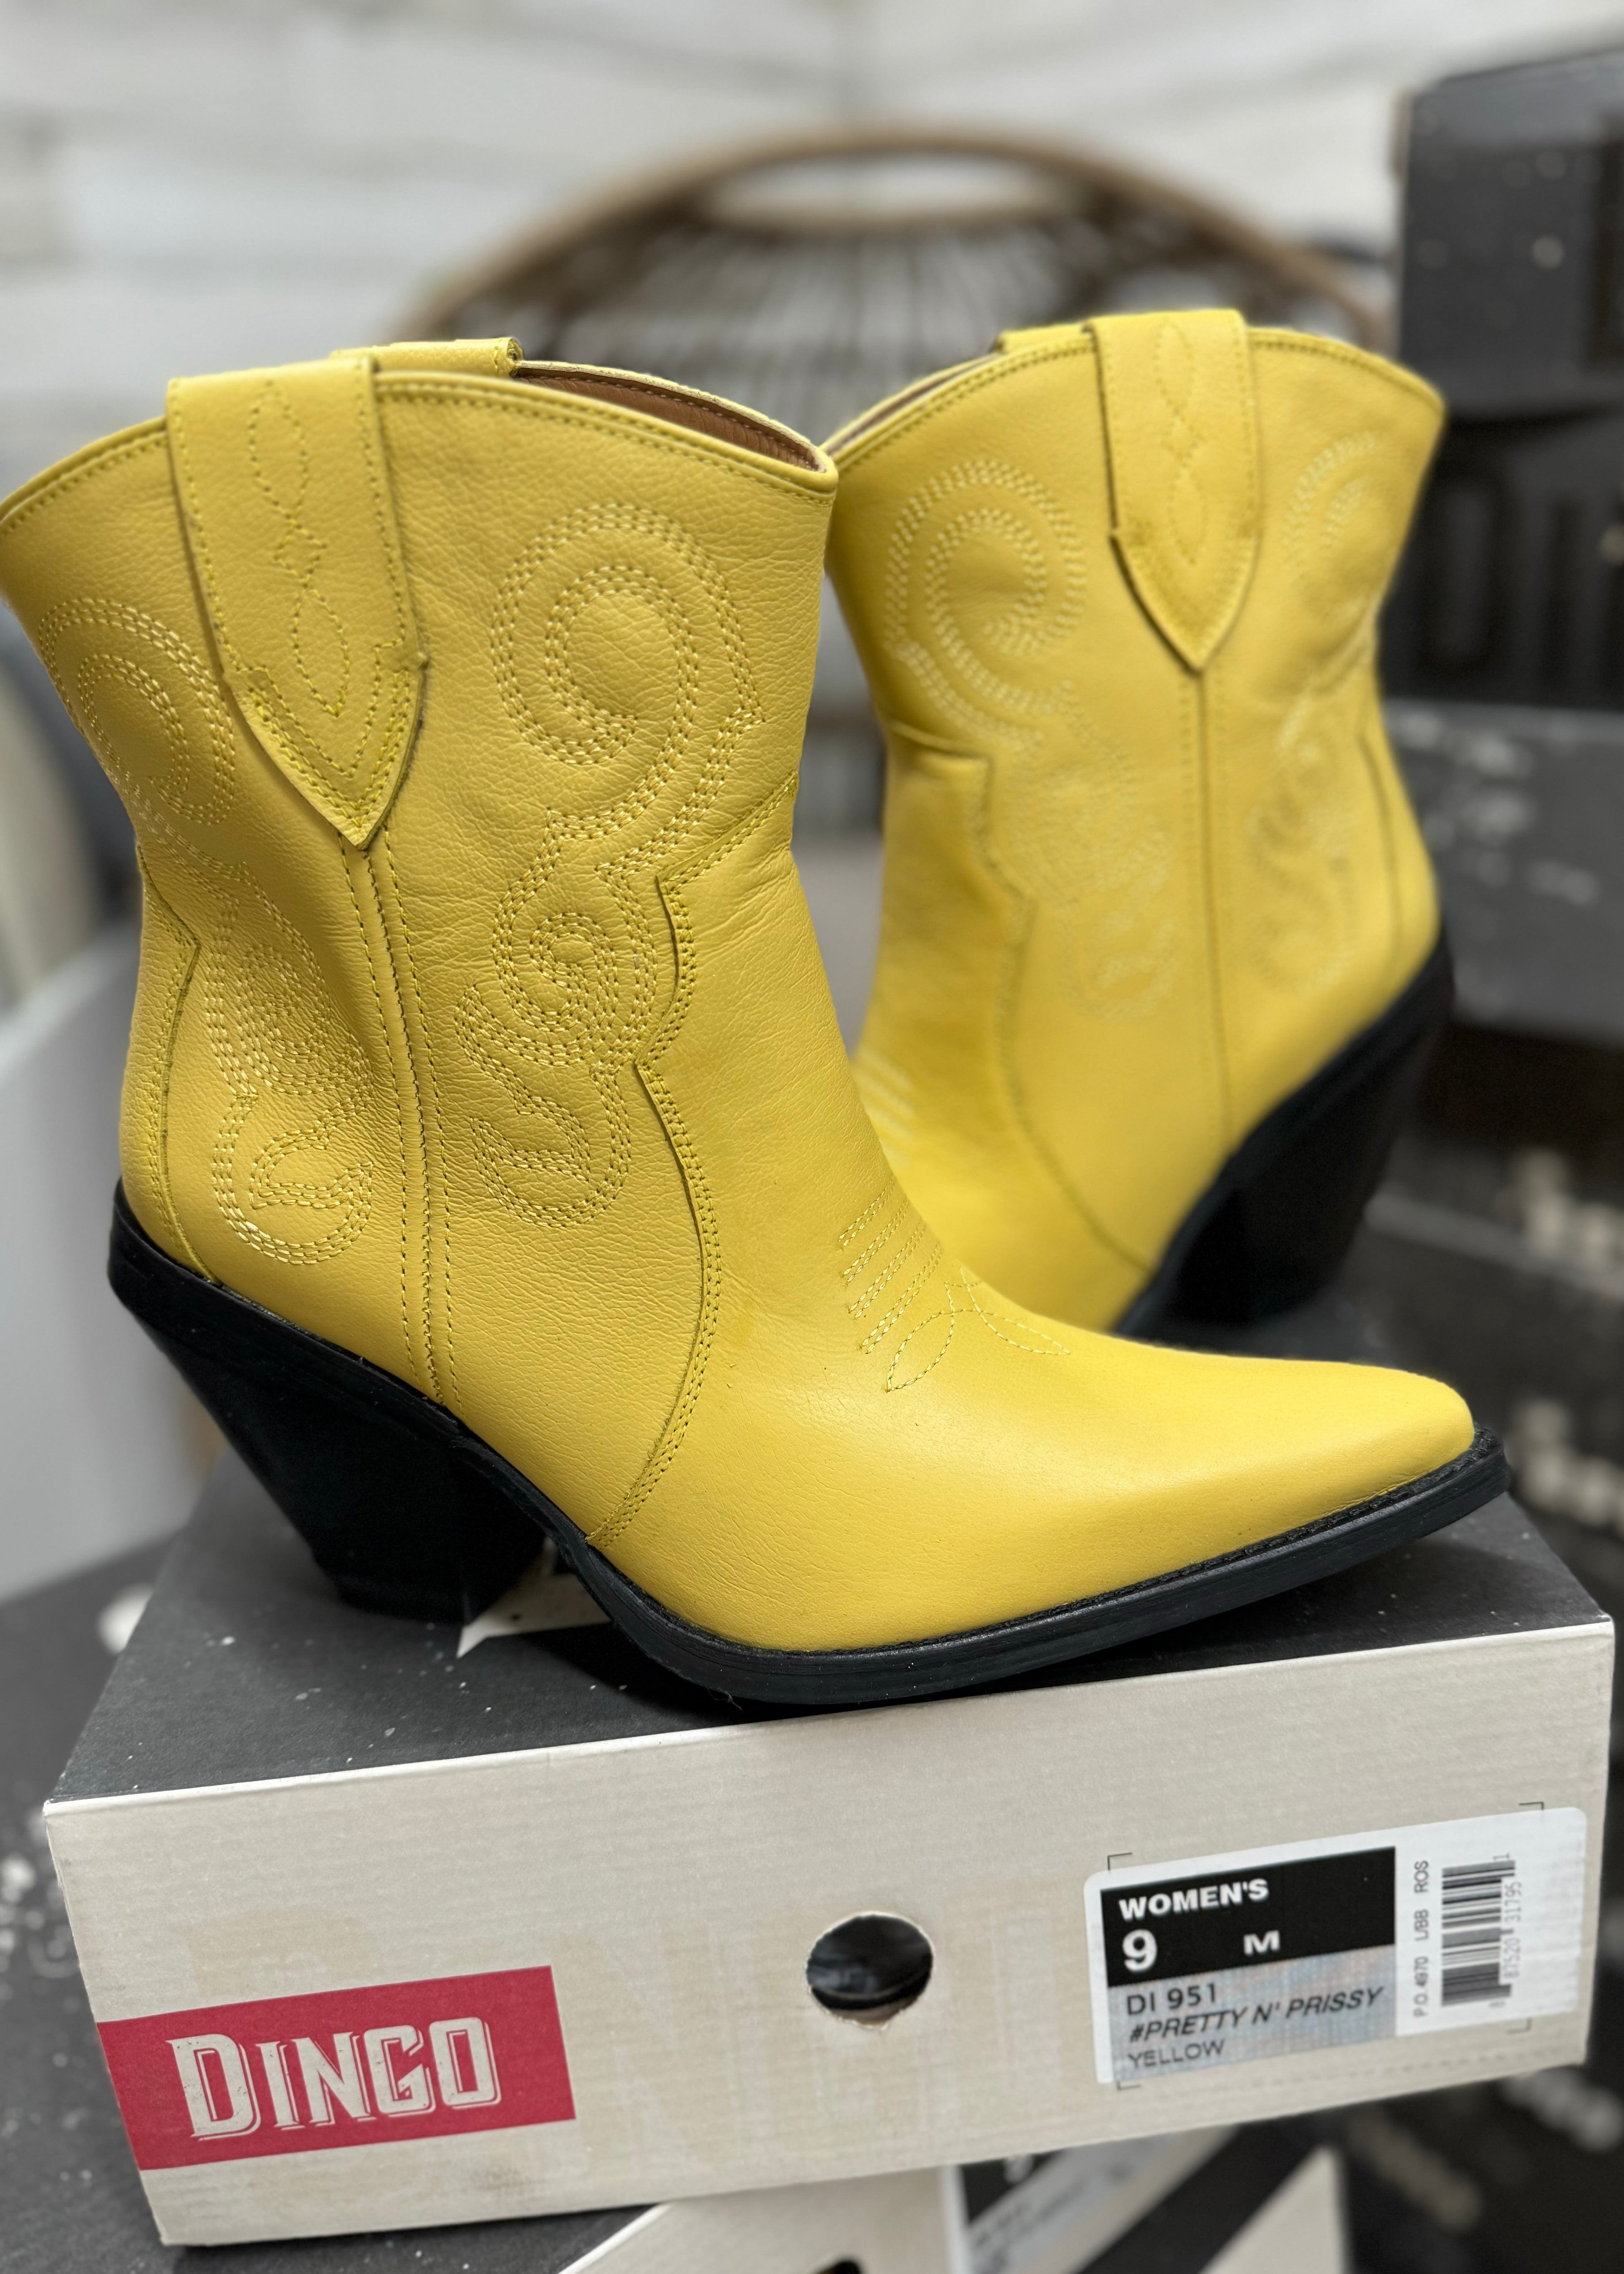 Last Chance Size 9 | Dingo | Pretty N Prissy Leather Bootie in Yellow  **DISCONTINUED** - Giddy Up Glamour Boutique